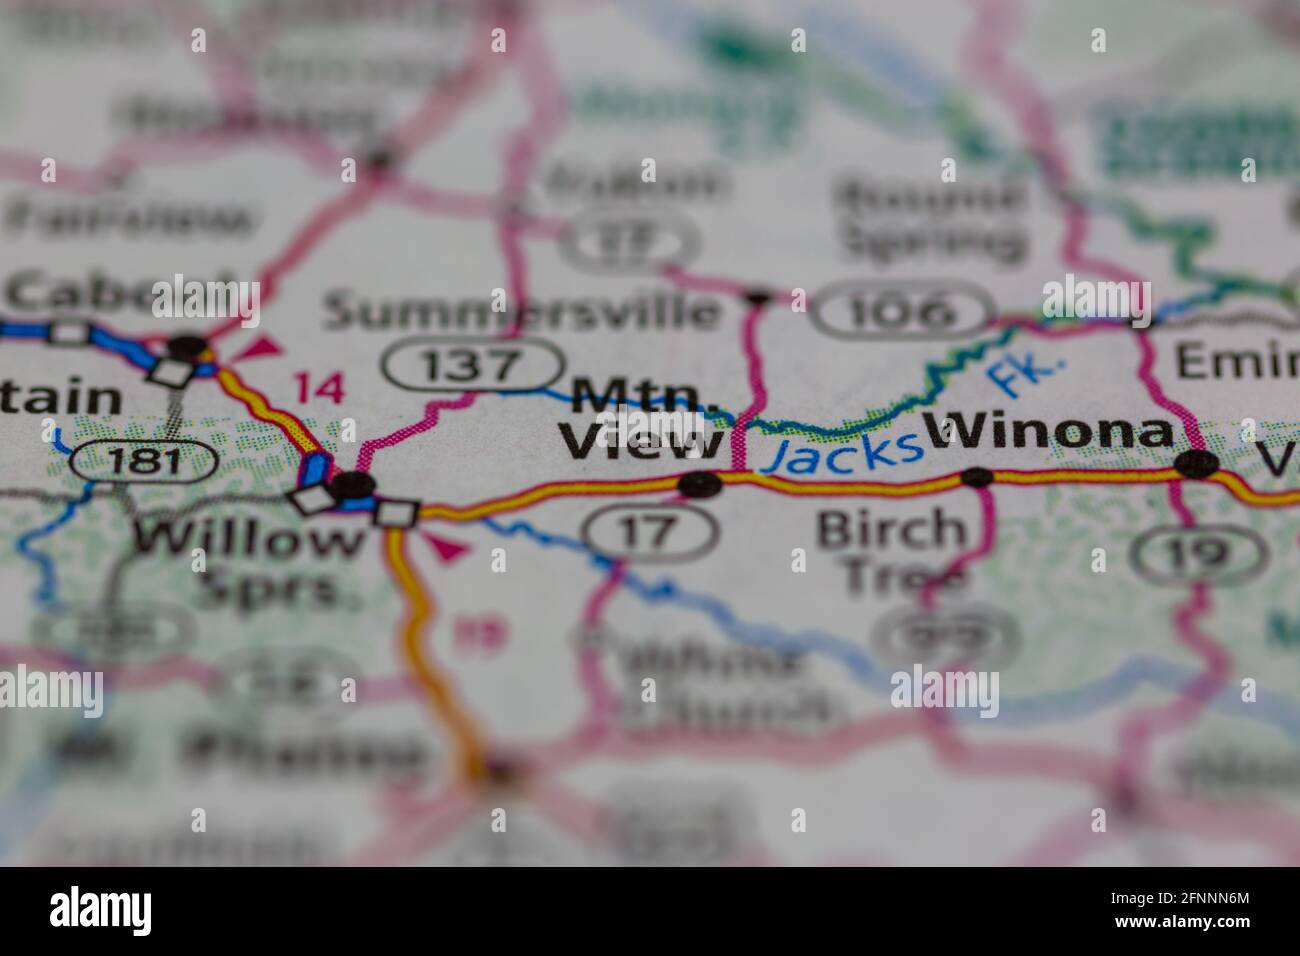 Mountain View Missouri USA shown on a Geography map or road map Stock Photo